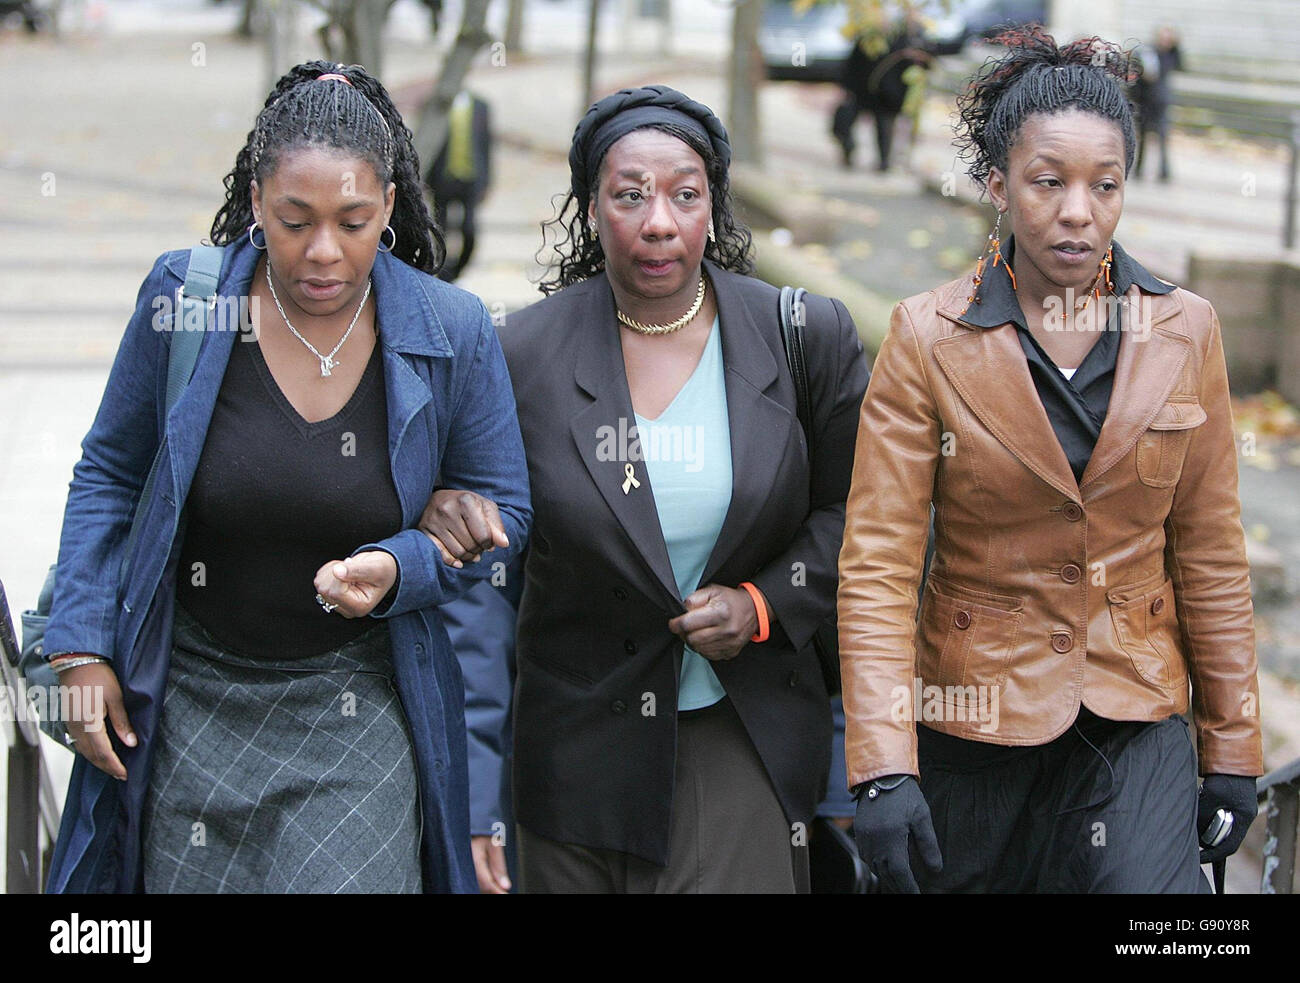 Gee Verona-Walker (centre), mother of Anthony Walker, arrives at Liverpool Crown Court with family members, Tuesday November 15 2005, where the two men accused of bludgeoning Anthony Walker to death with an axe go on trial. Paul Taylor and Michael Barton, aged 20 and 17, allegedly attacked the 18-year-old in July as he walked through Huyton, Merseyside, with his girlfriend and cousin. See PA story COURTS Axe. PRESS ASSOCIATION Photo. Photo credit should read: Martin Rickett/PA Stock Photo